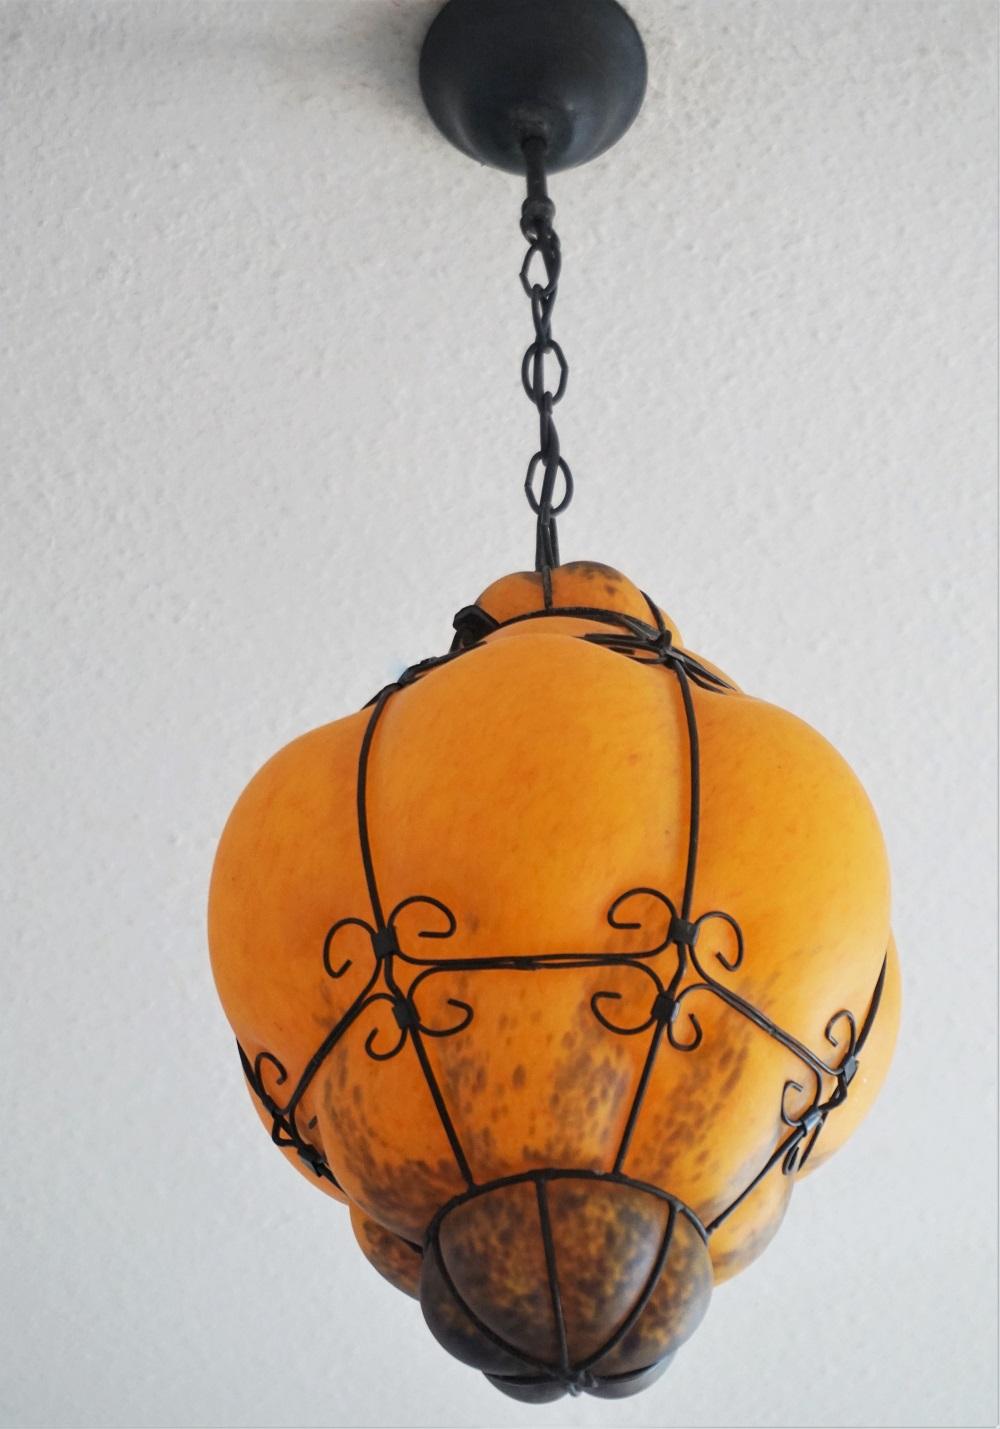 Italian Murano Handcrafted Colored Glass Wrought Iron Pendant or Lantern, Venice, Italy For Sale